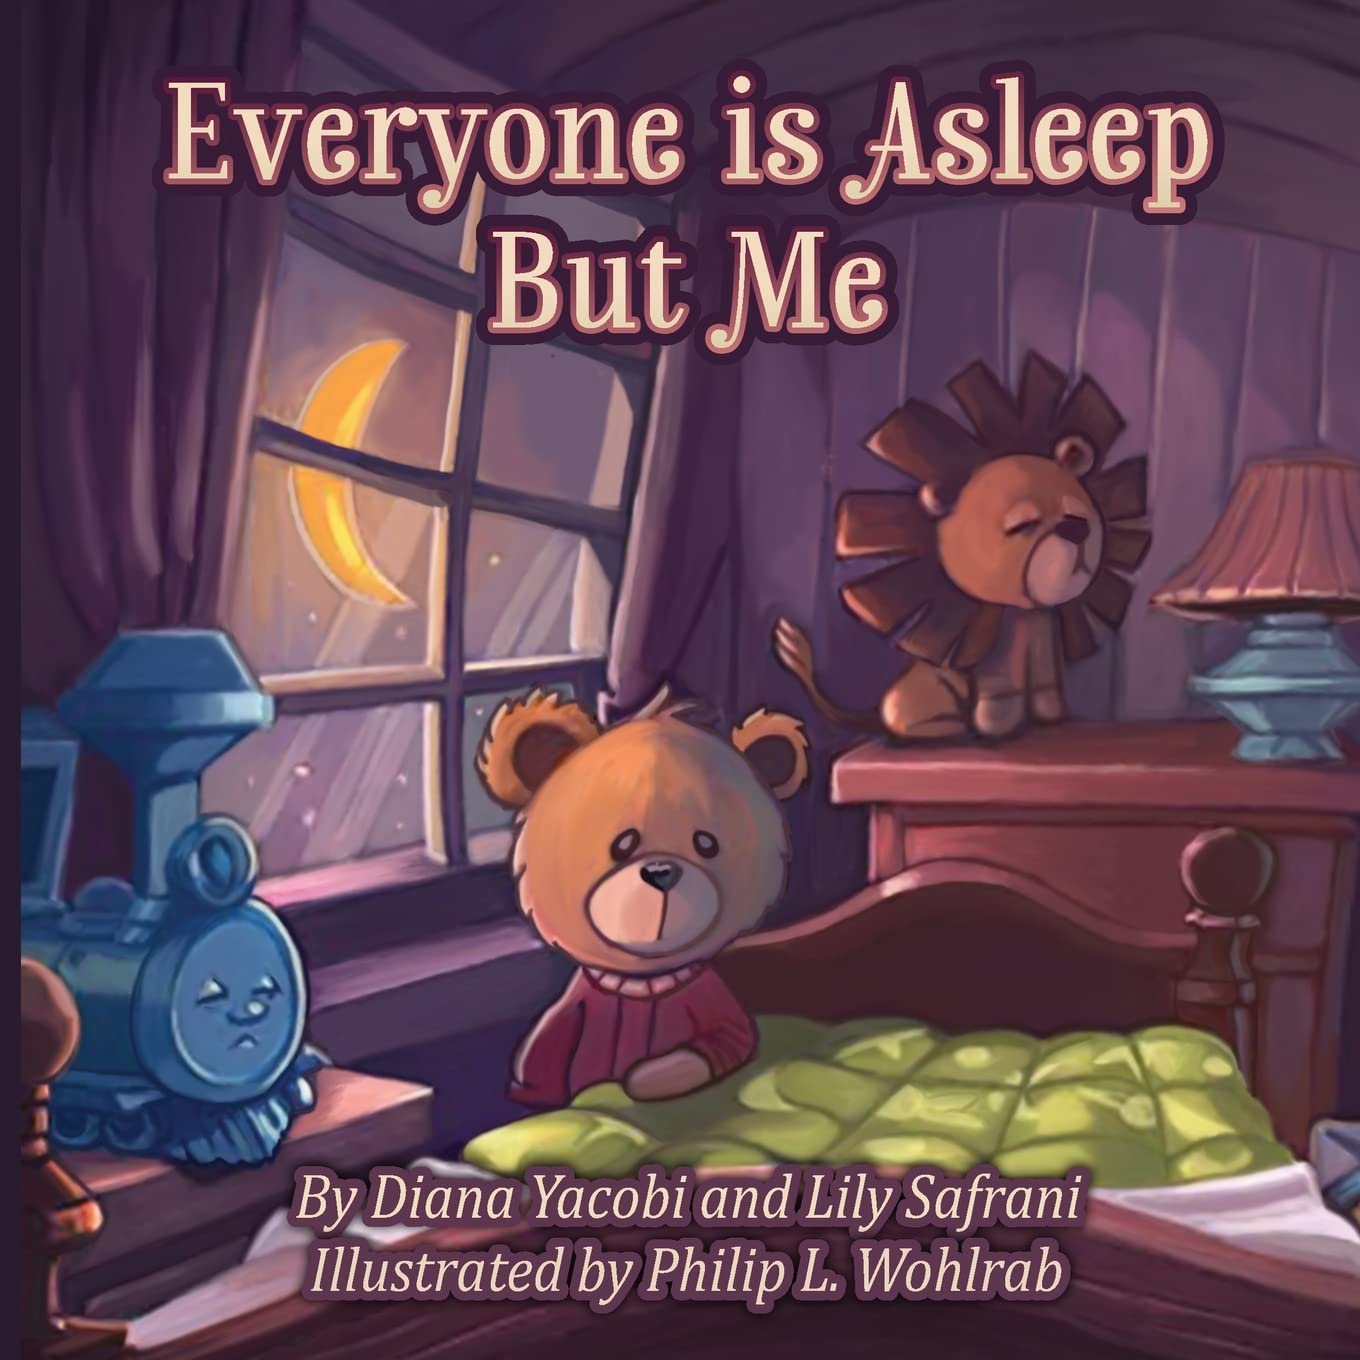 Author’s Tranquility Press Publishes Debut Children’s Book Everyone Is Asleep But Me